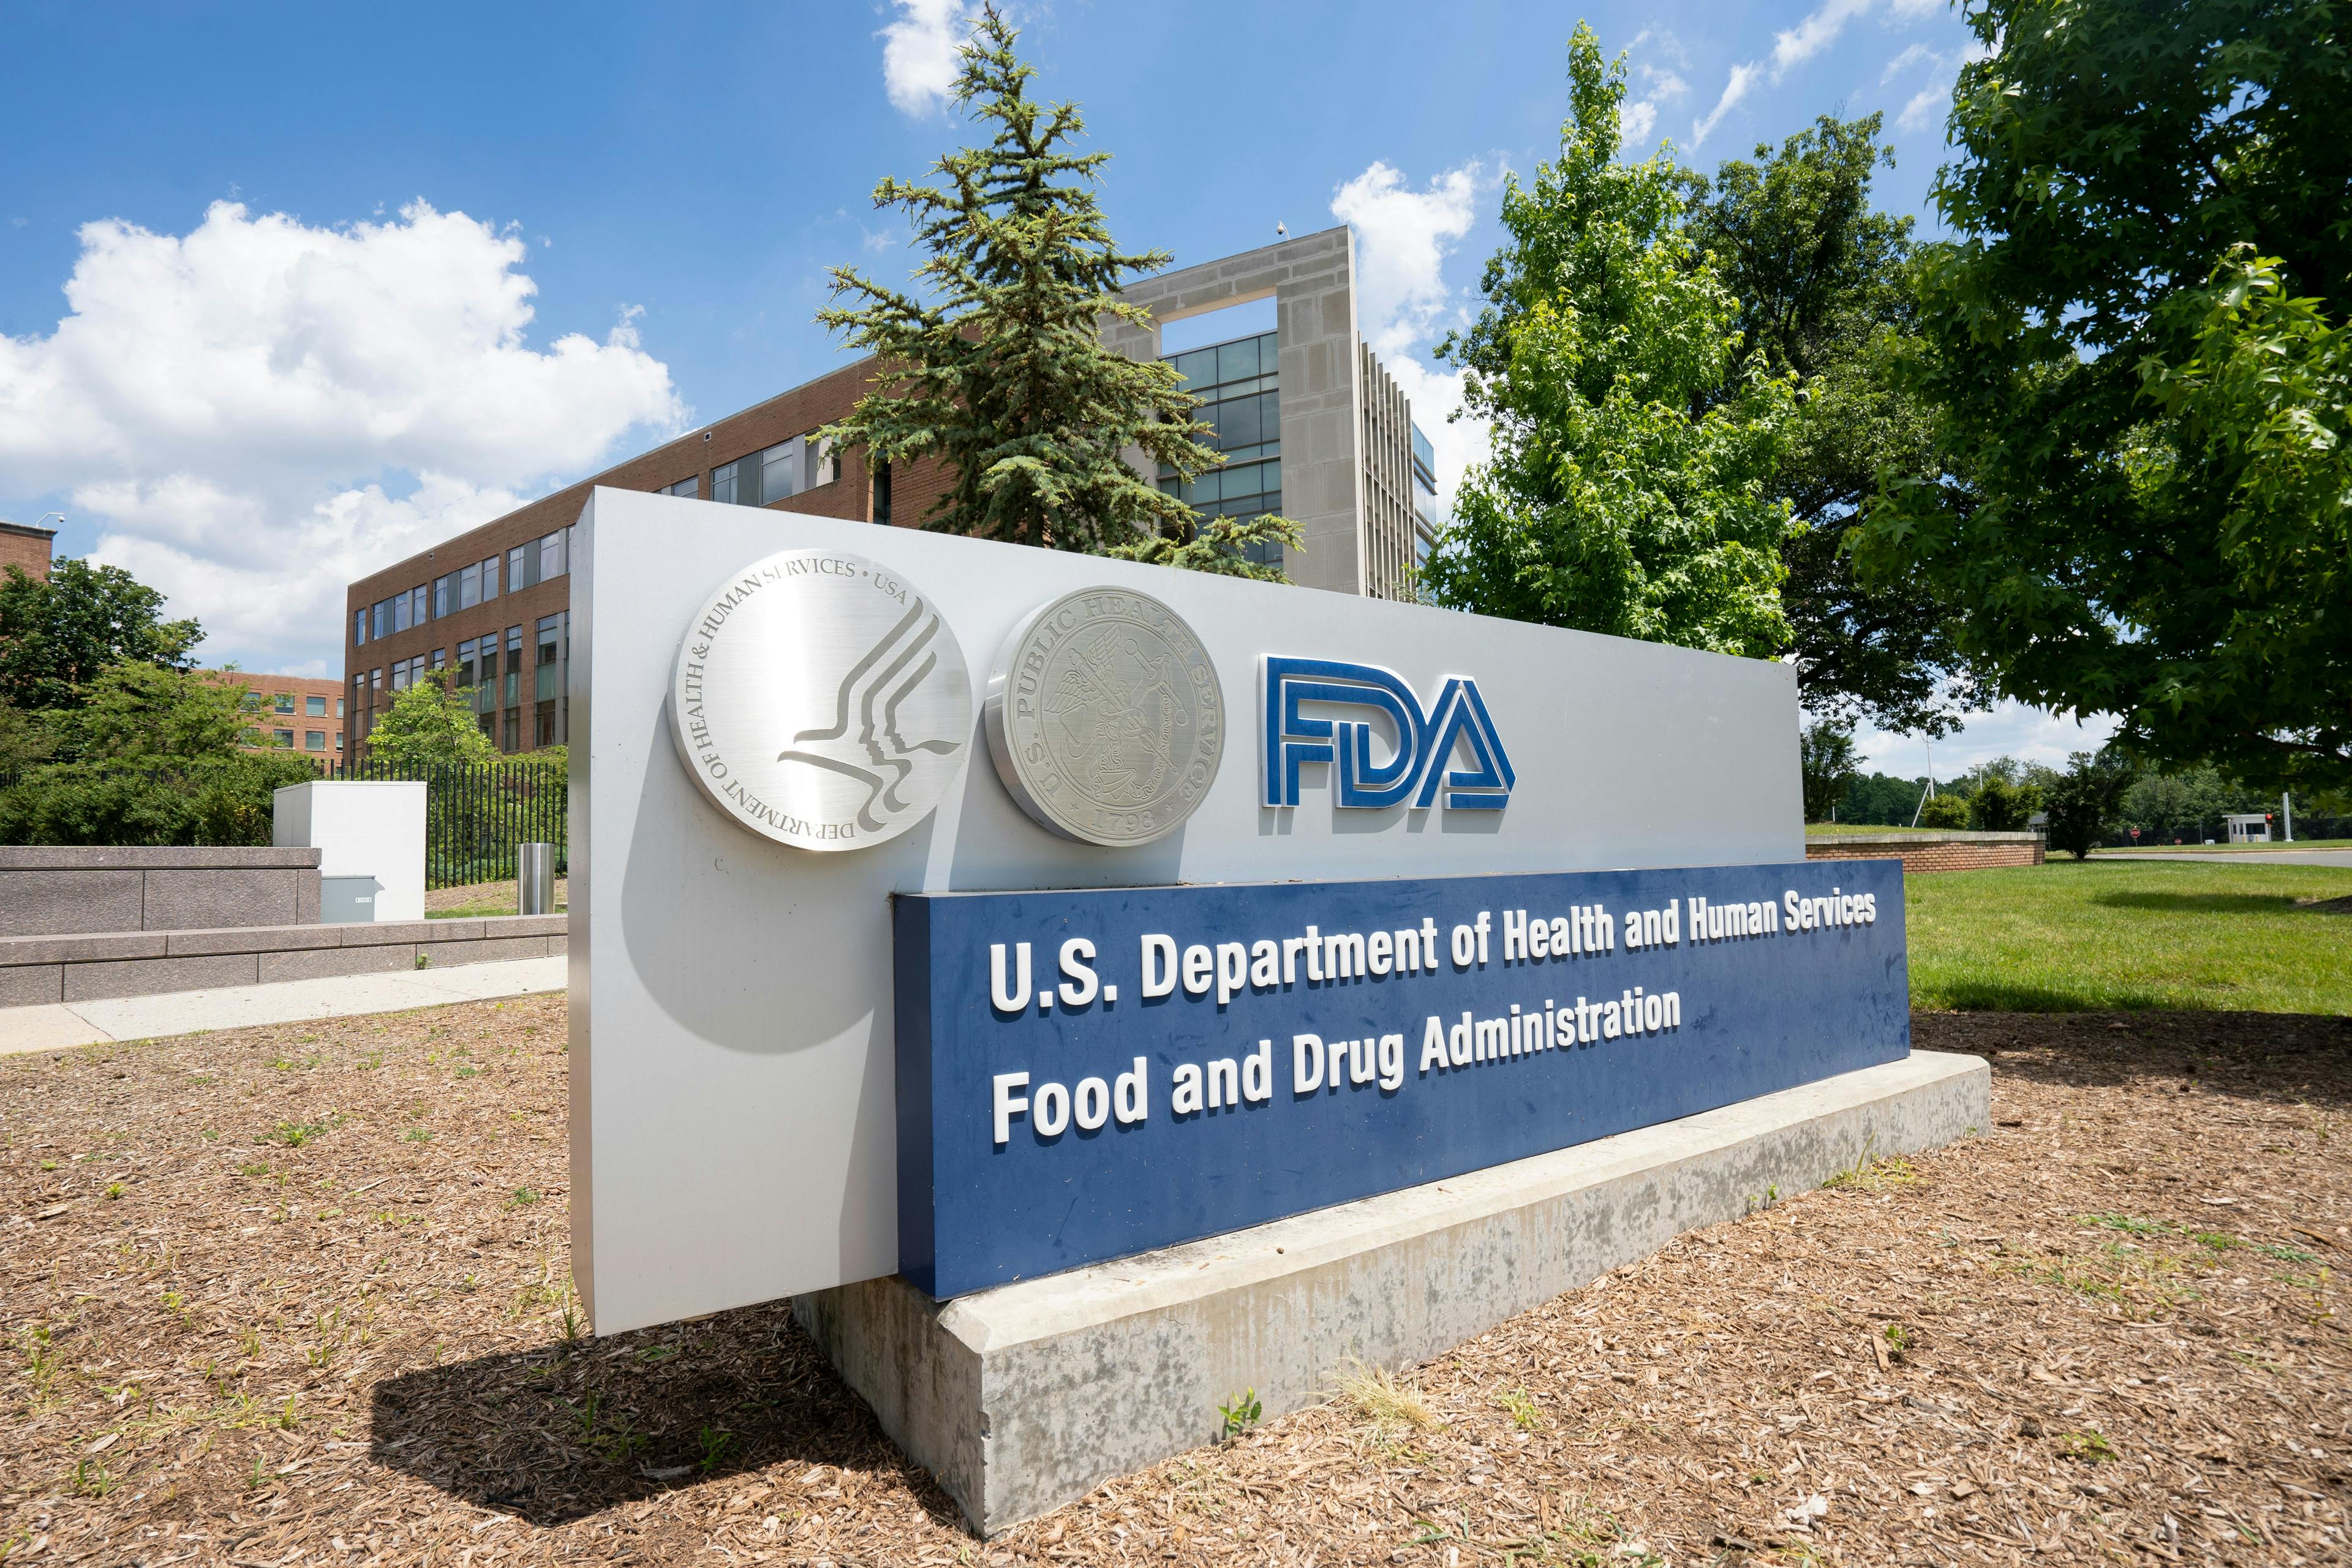 Silver Spring, MD, USA - June 25, 2022: The FDA White Oak Campus, headquarters of the United States Food and Drug Administration, a federal agency of the Department of Health and Human Services (HHS).